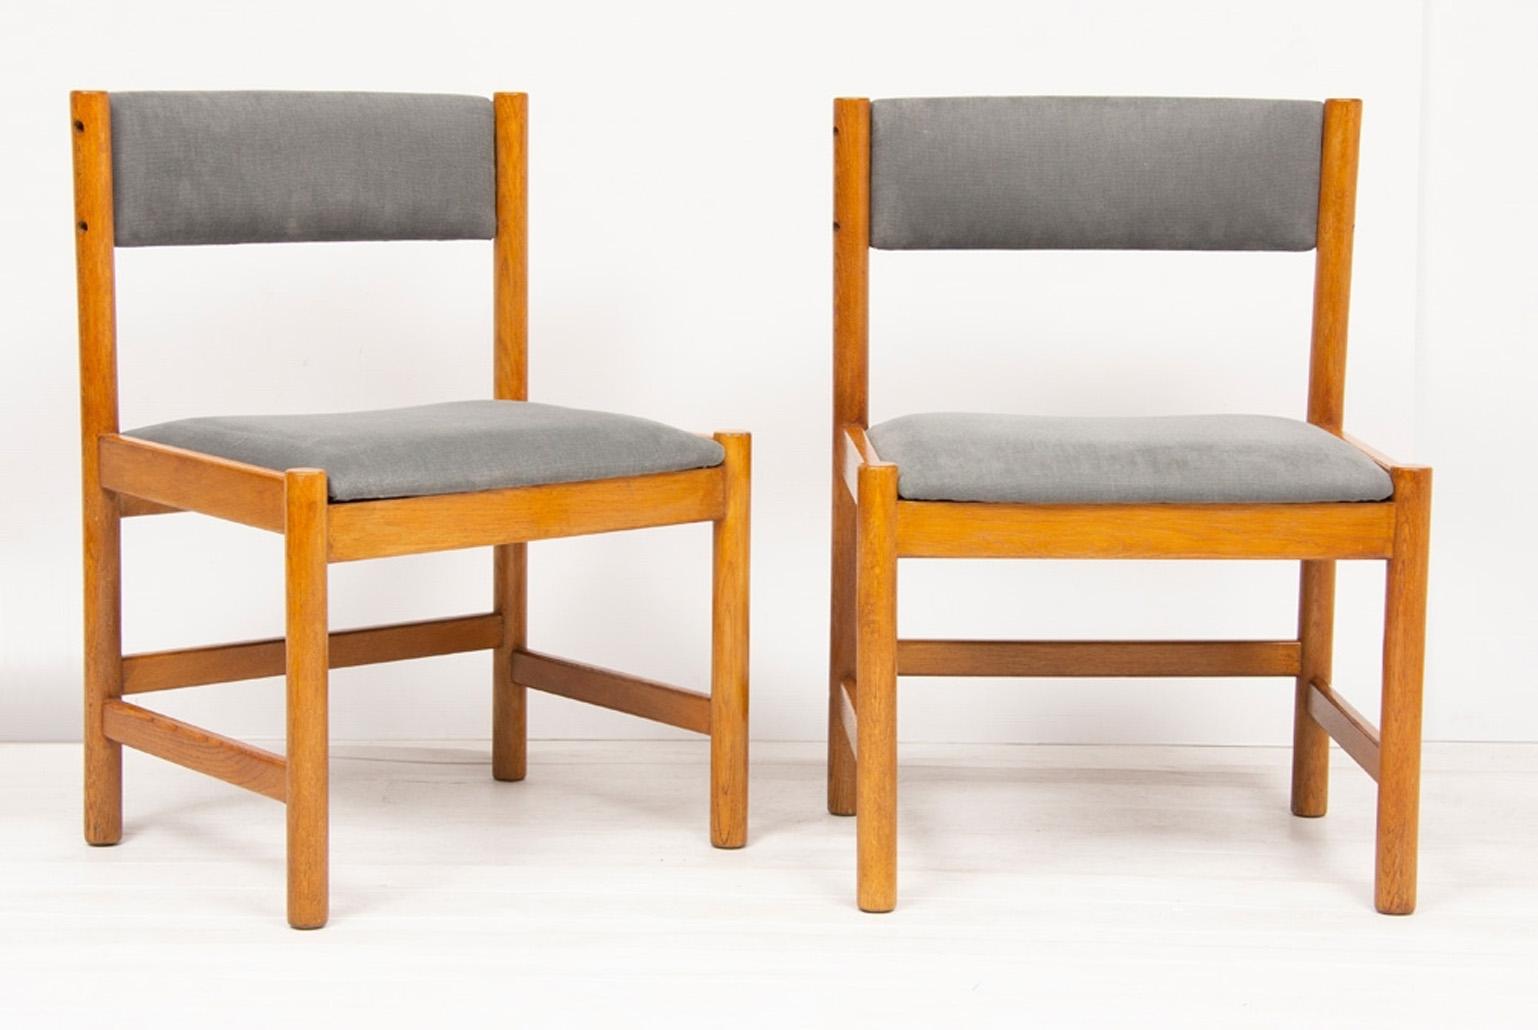 Set of six midcentury Danish oak dining chairs by Borge Mogensen. Newly upholstered in blue/grey brushed linen.